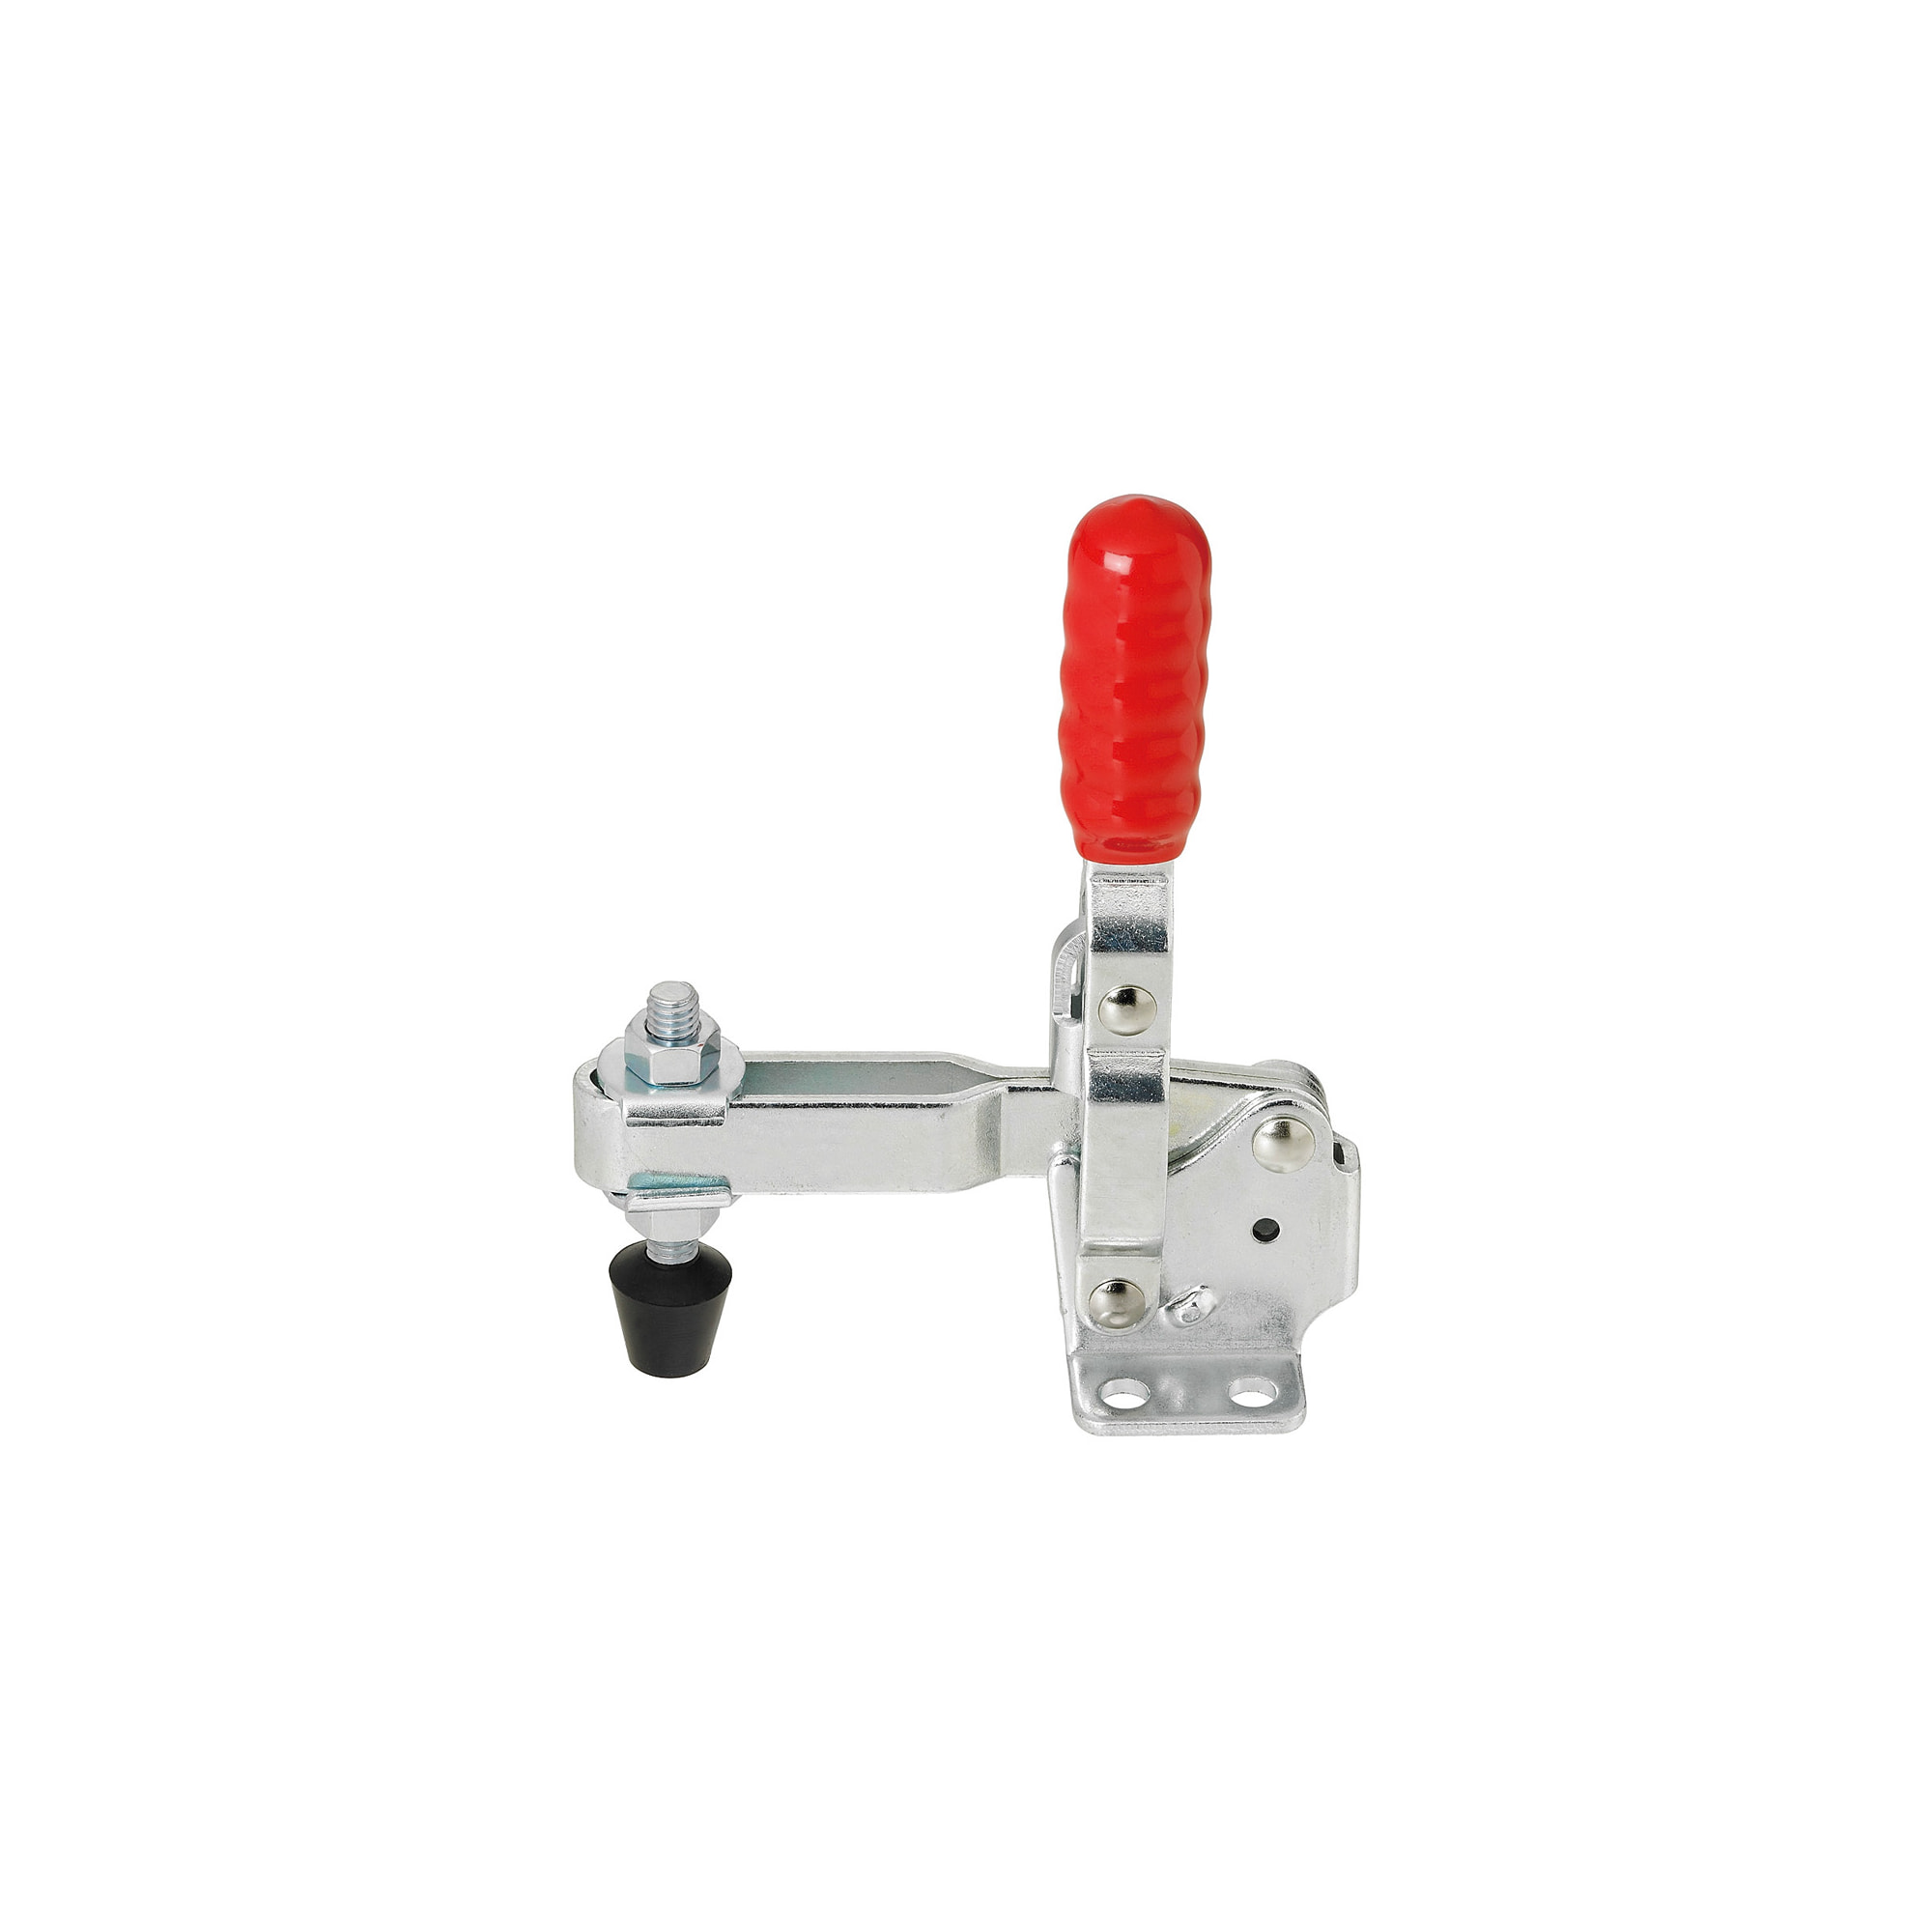 Adjustable Mounting Base for Toggle Clamps, Fits 5/8 Holes